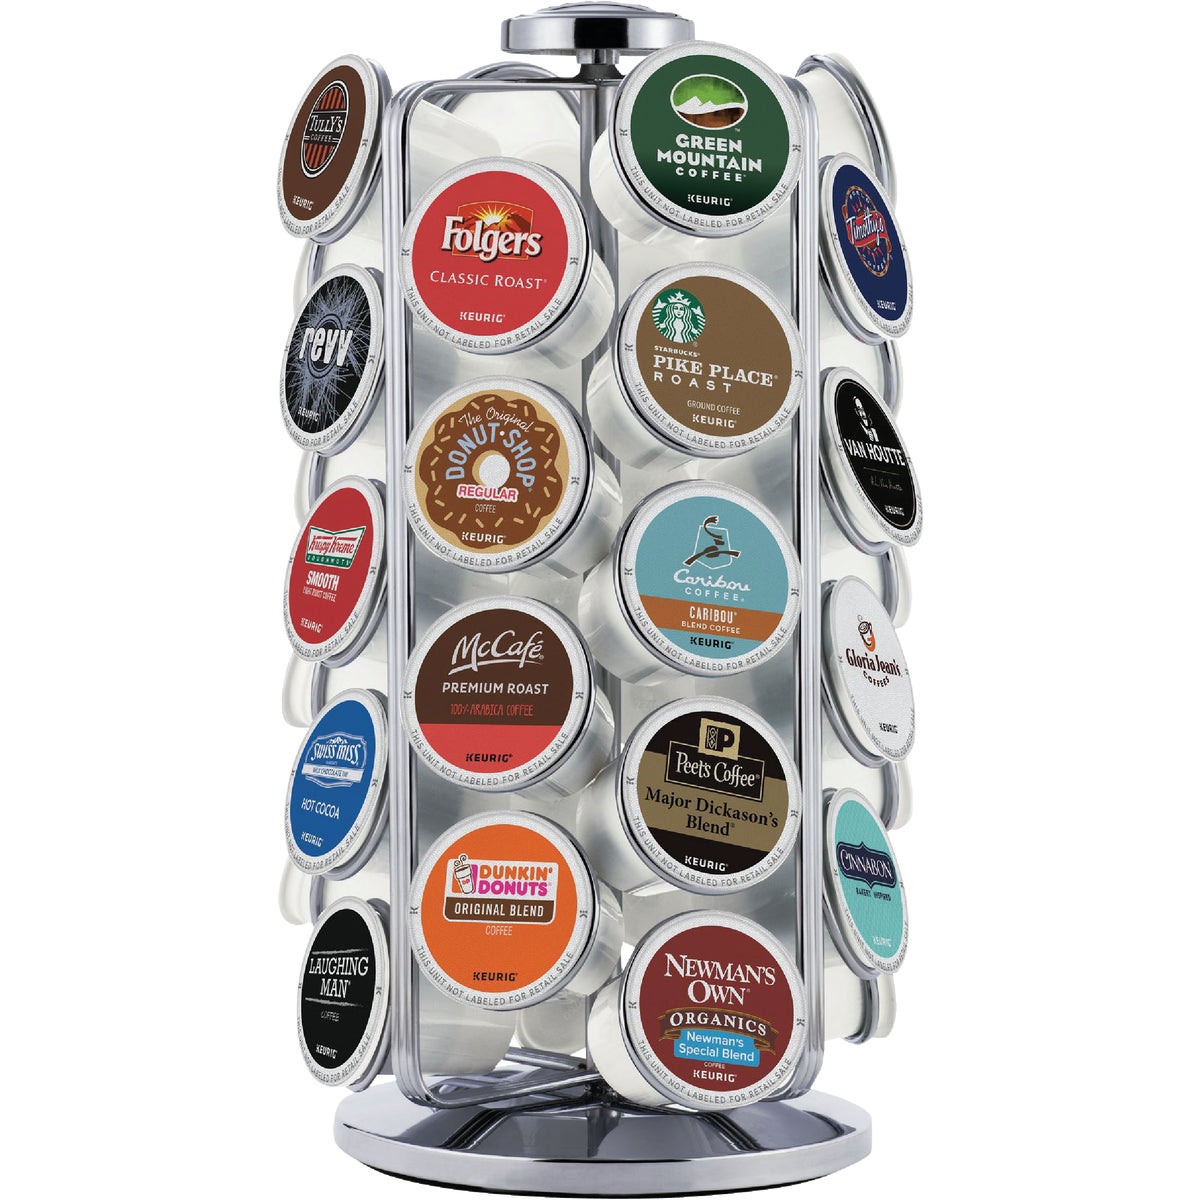 Item 602695, Slim, space saving K-Cup carousel is made of high quality metal with a 